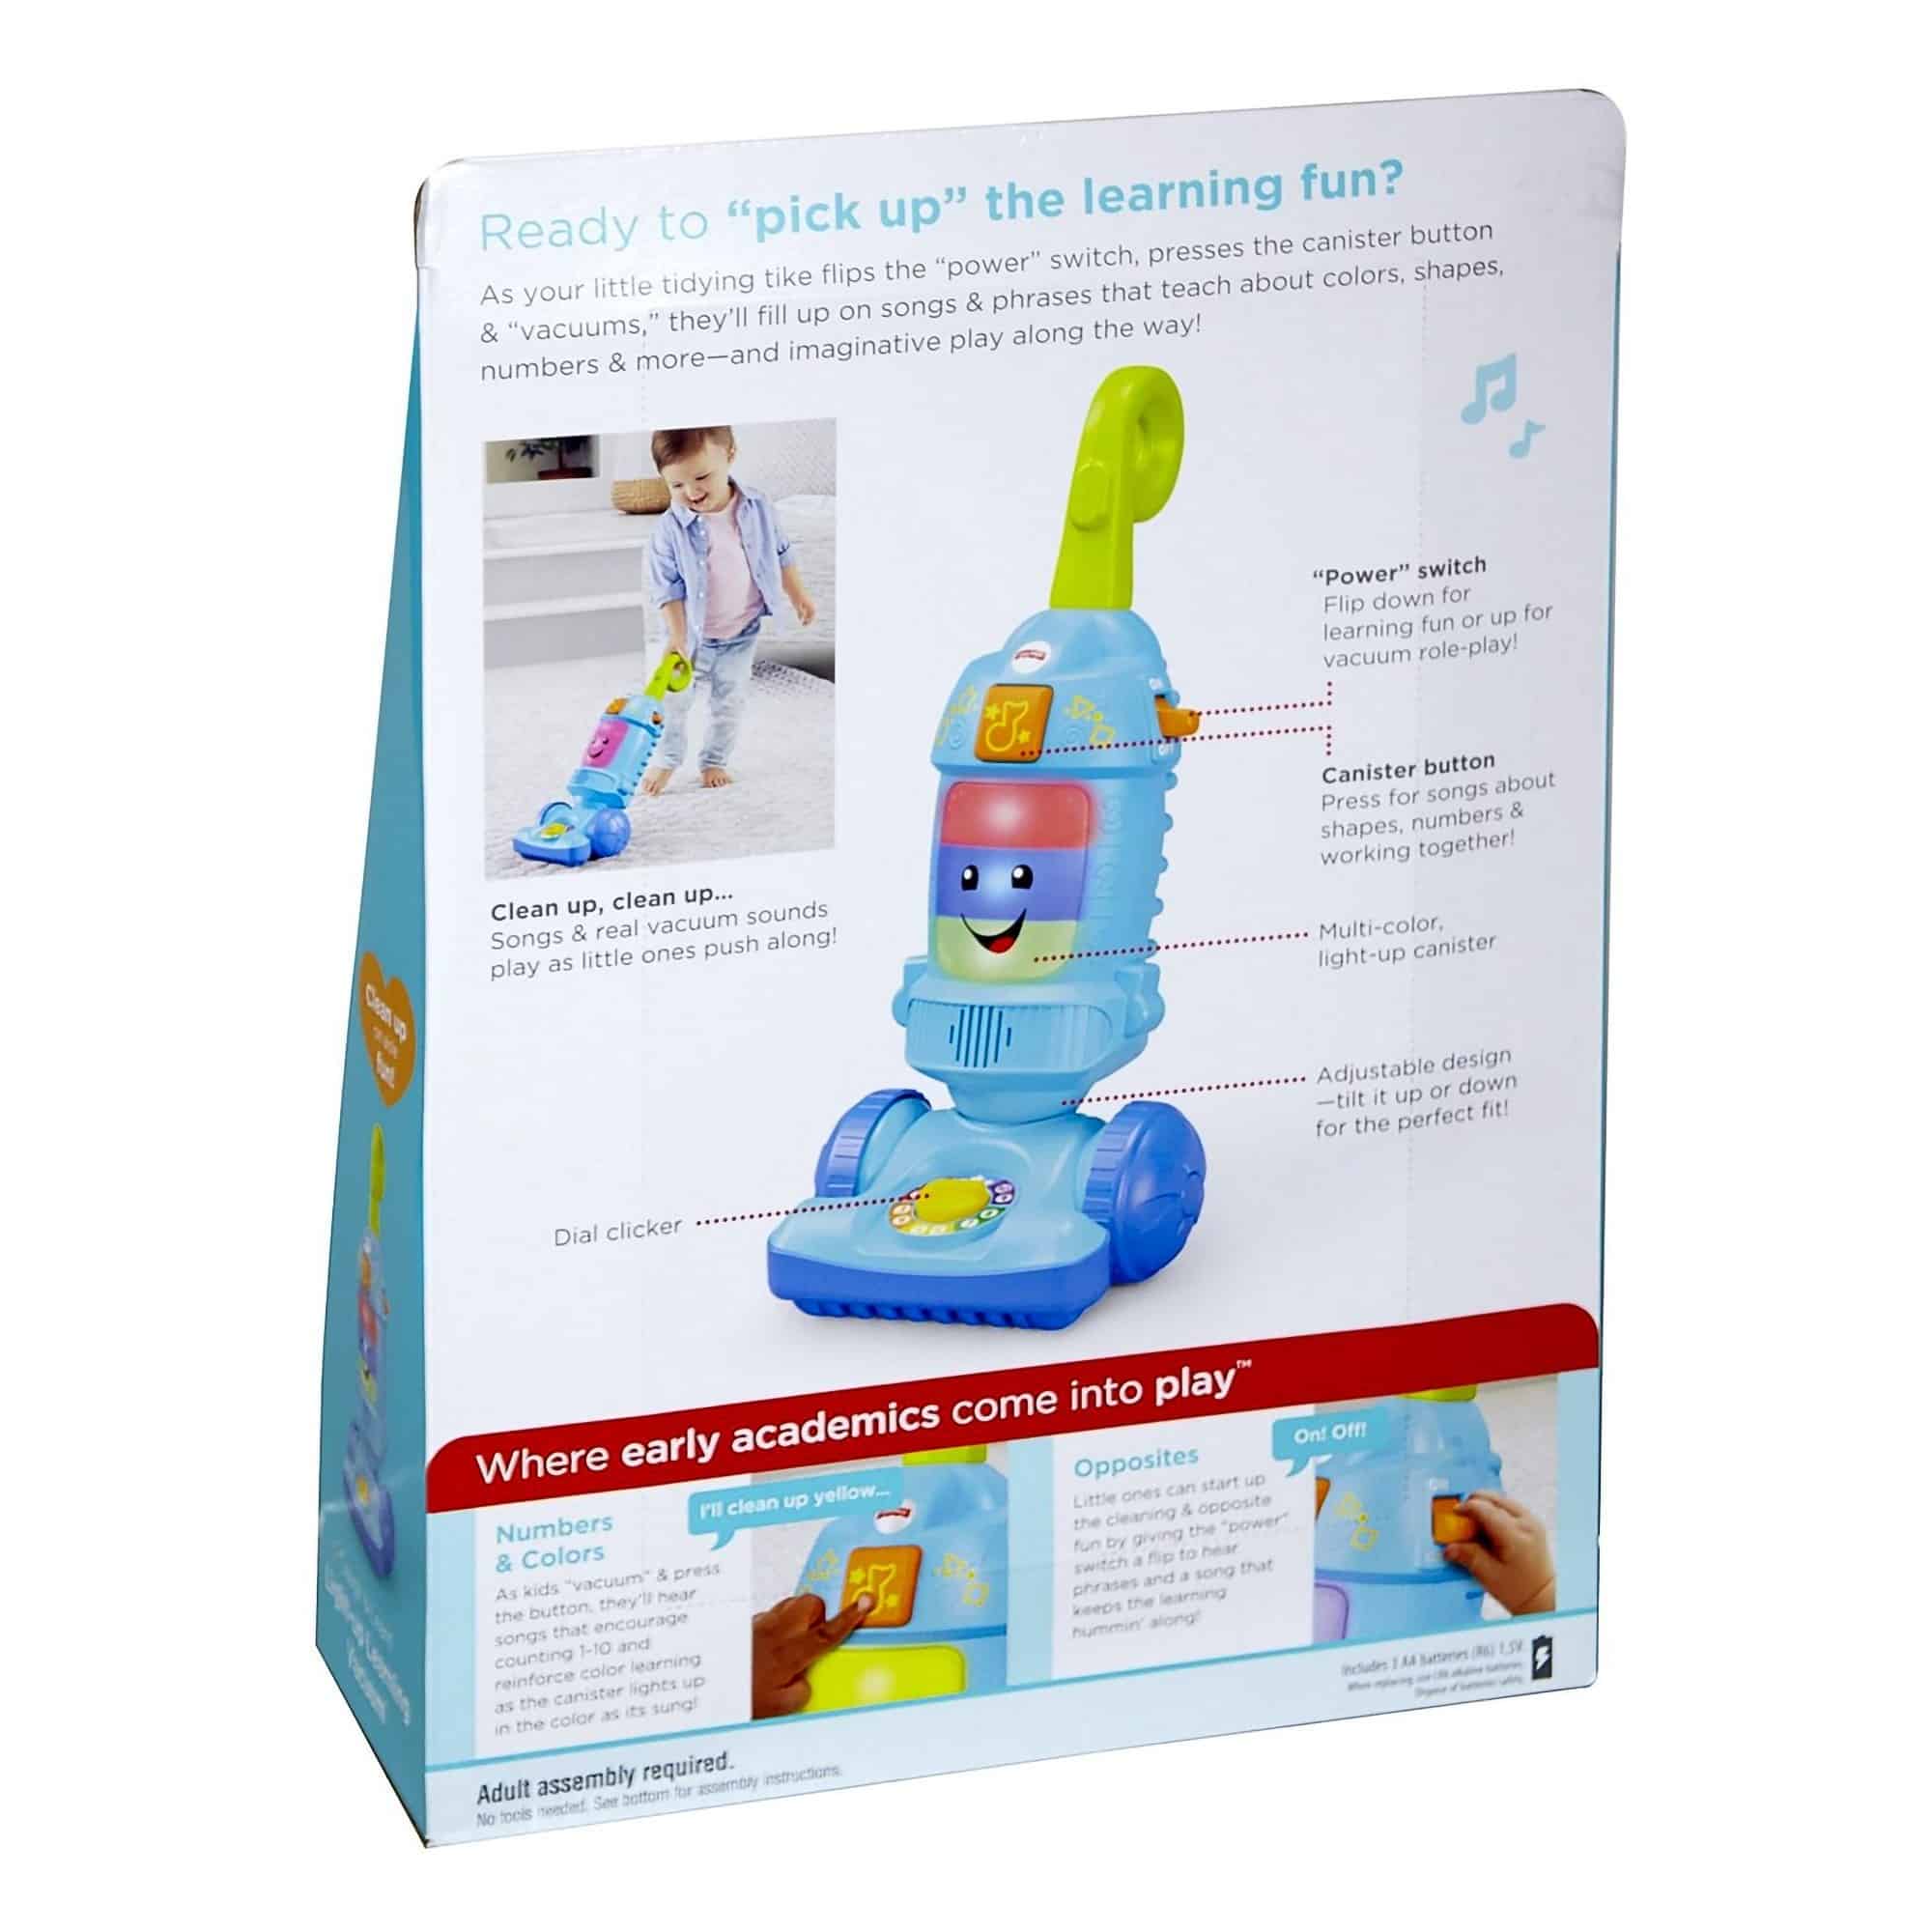 Fisher Price - Laugh & Learn - Light-up Learning Vacuum